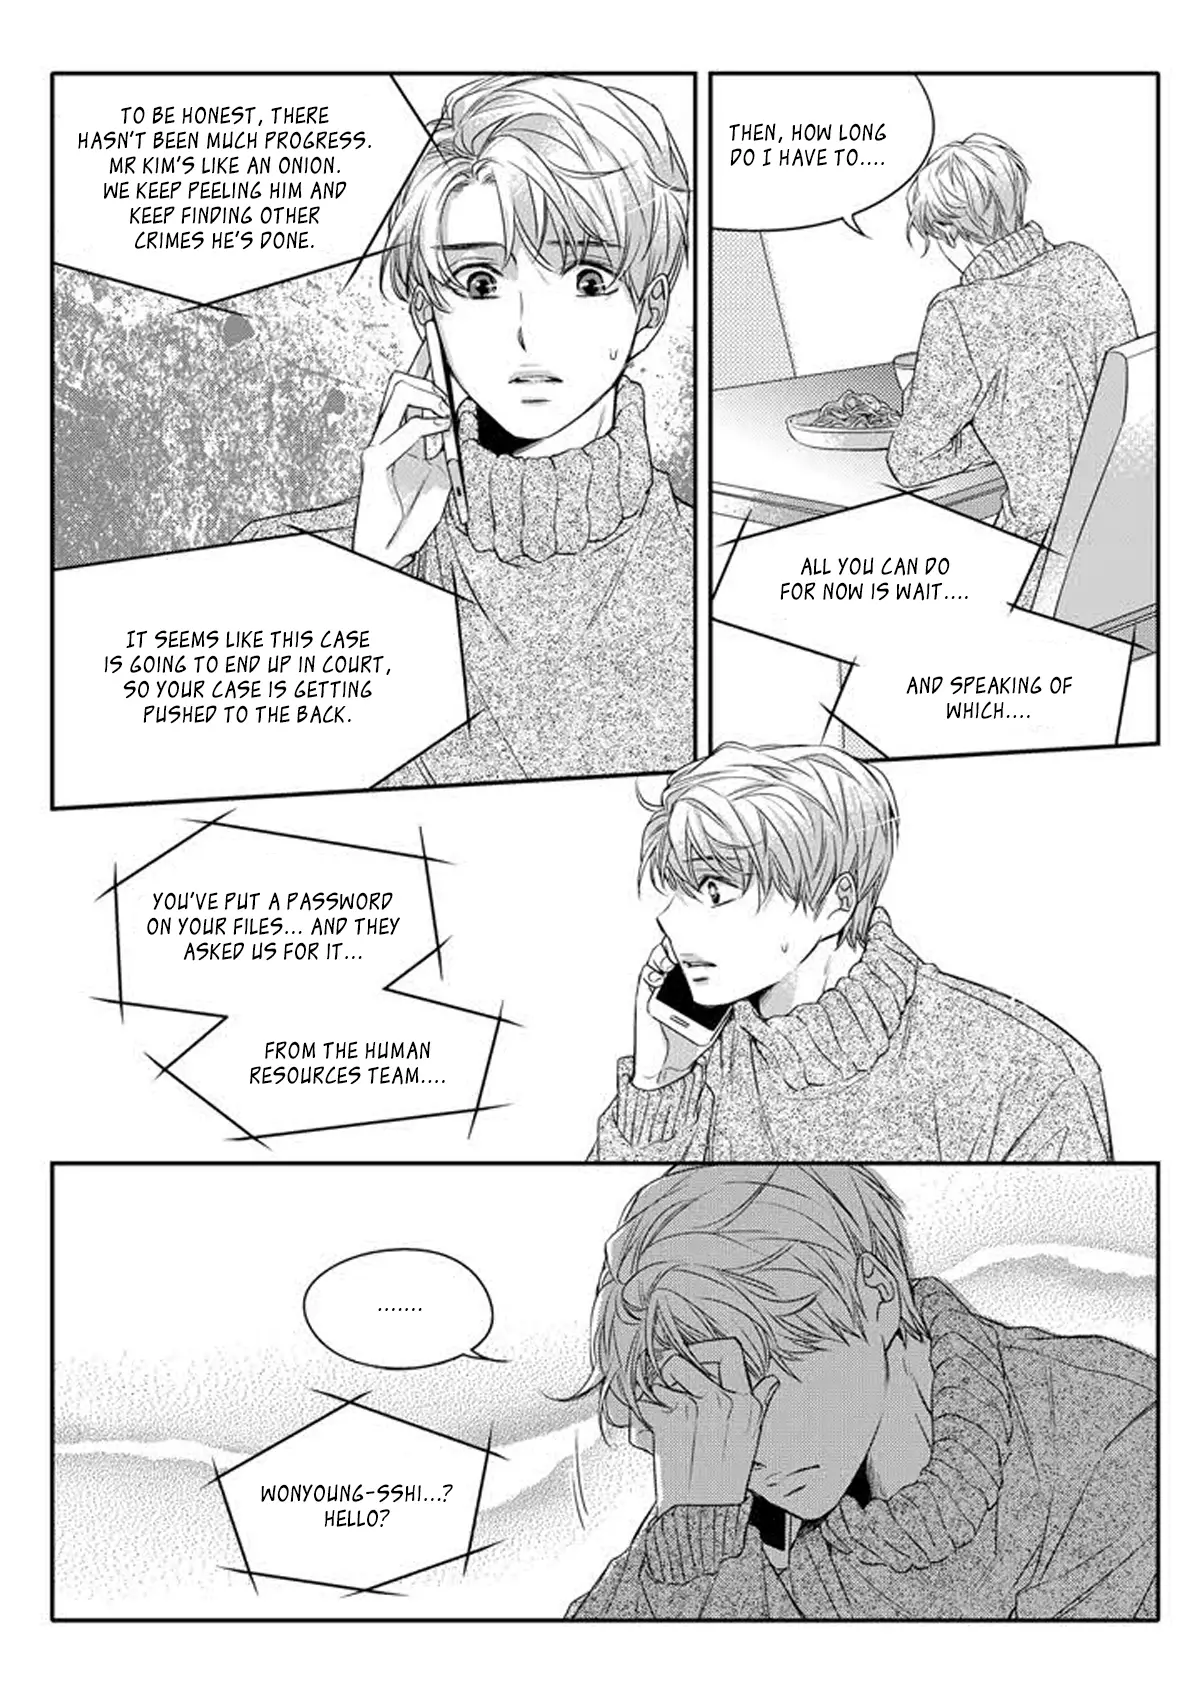 Unintentional Love Story - 1 page 13